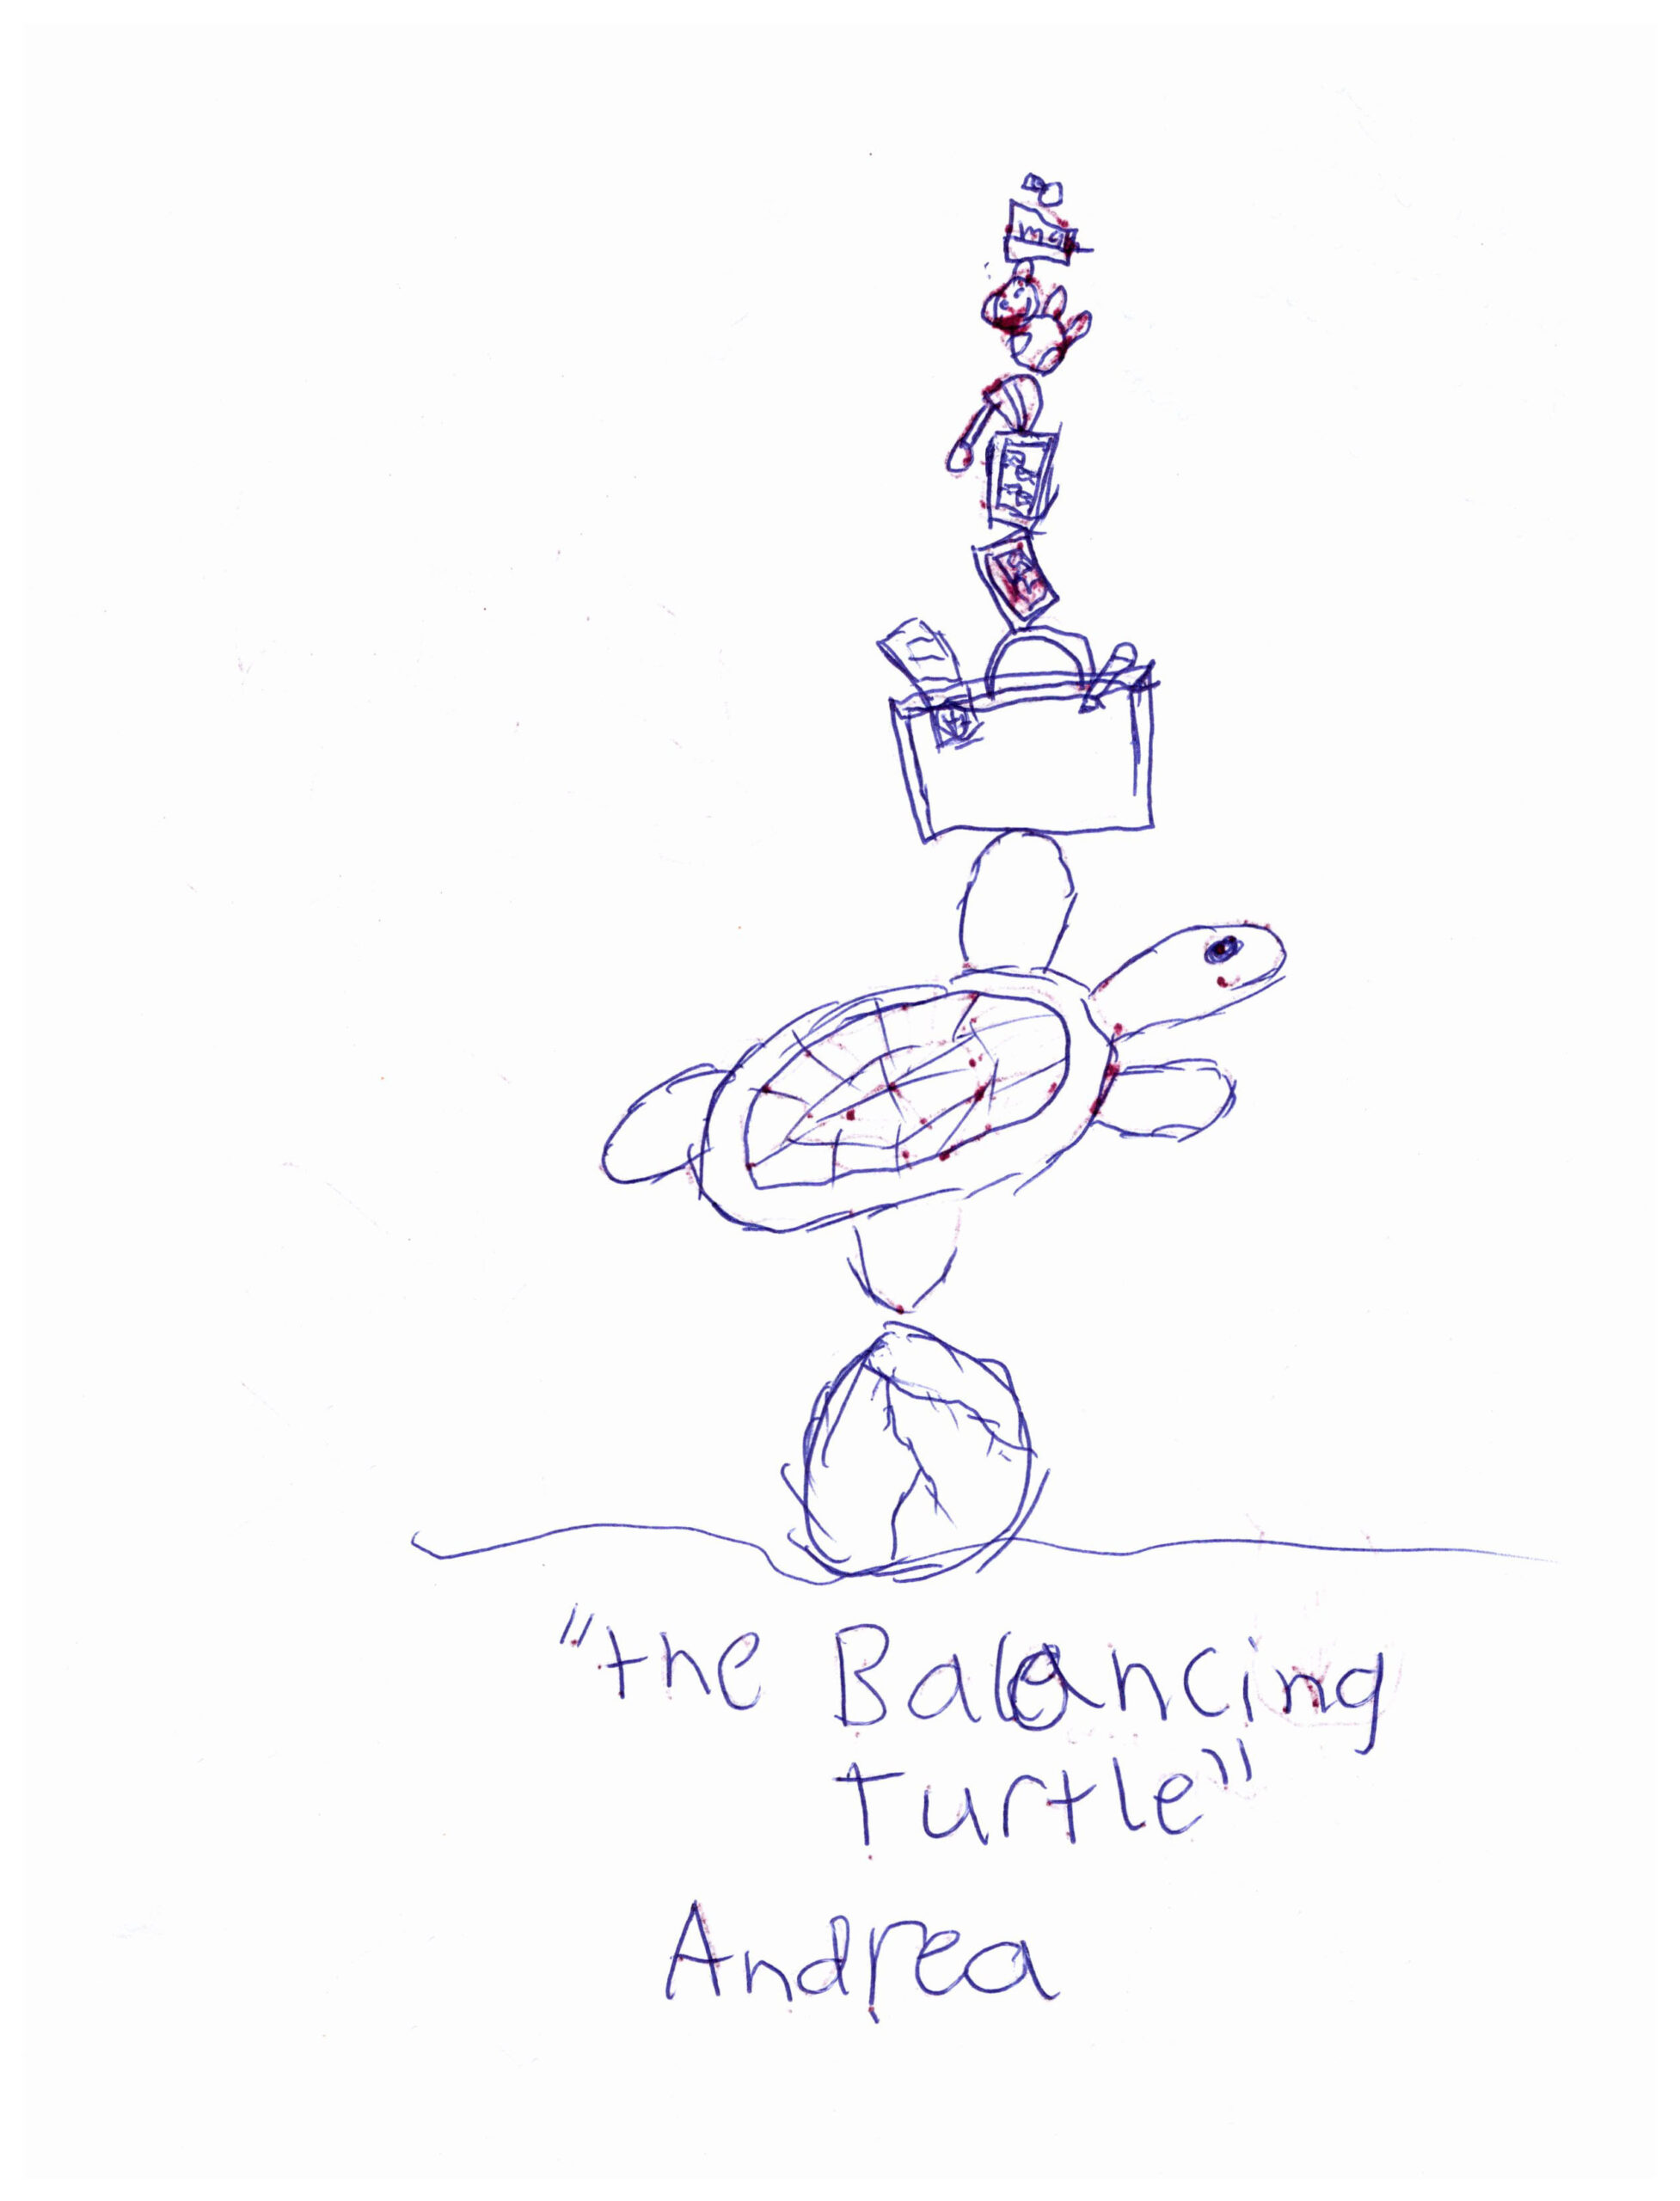 The Balancing Turtle in Guest Participation Book at Price Sculpture Forest